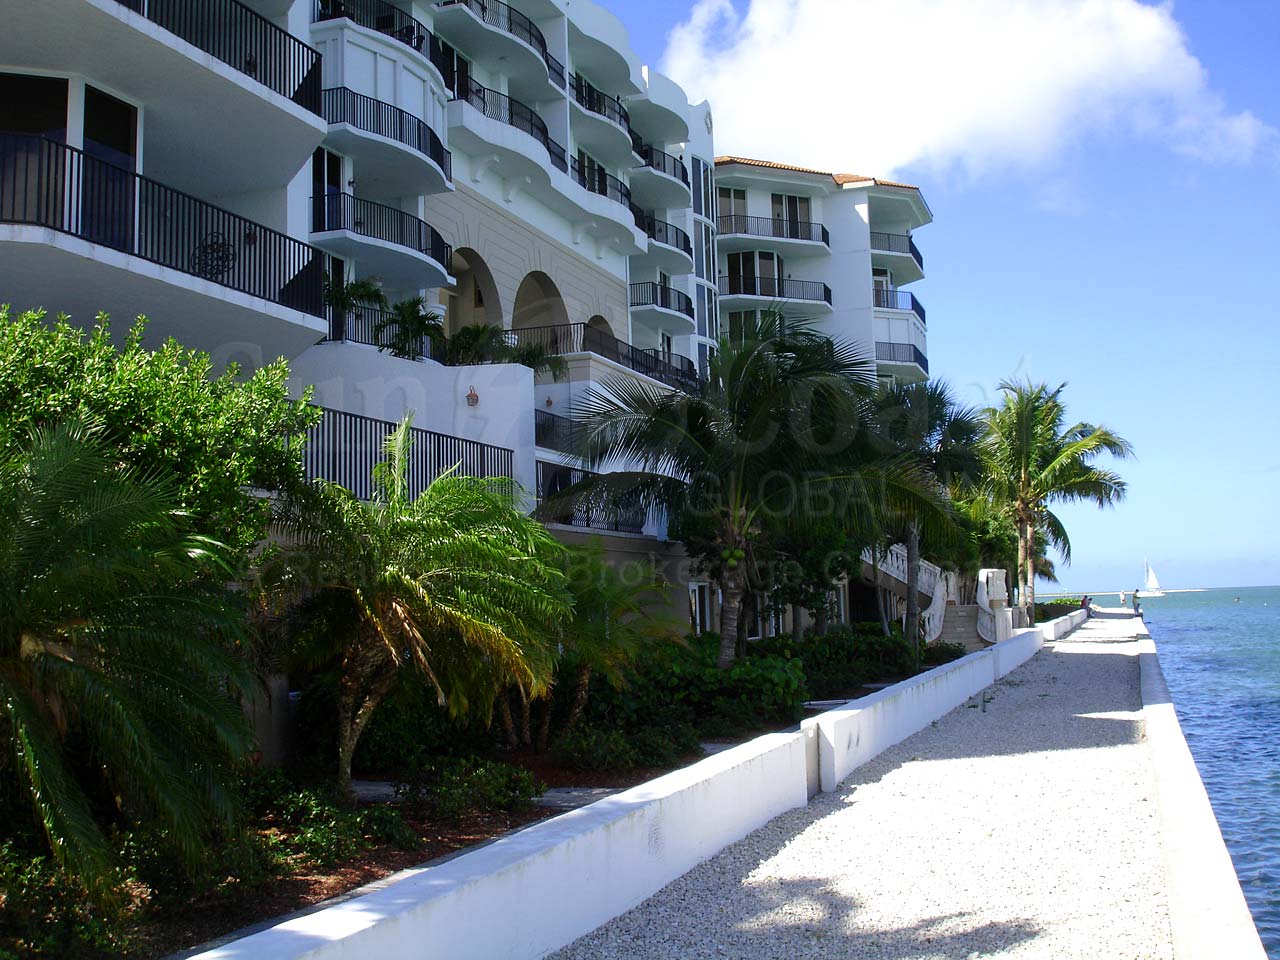 Twin Dolphins Condominiums